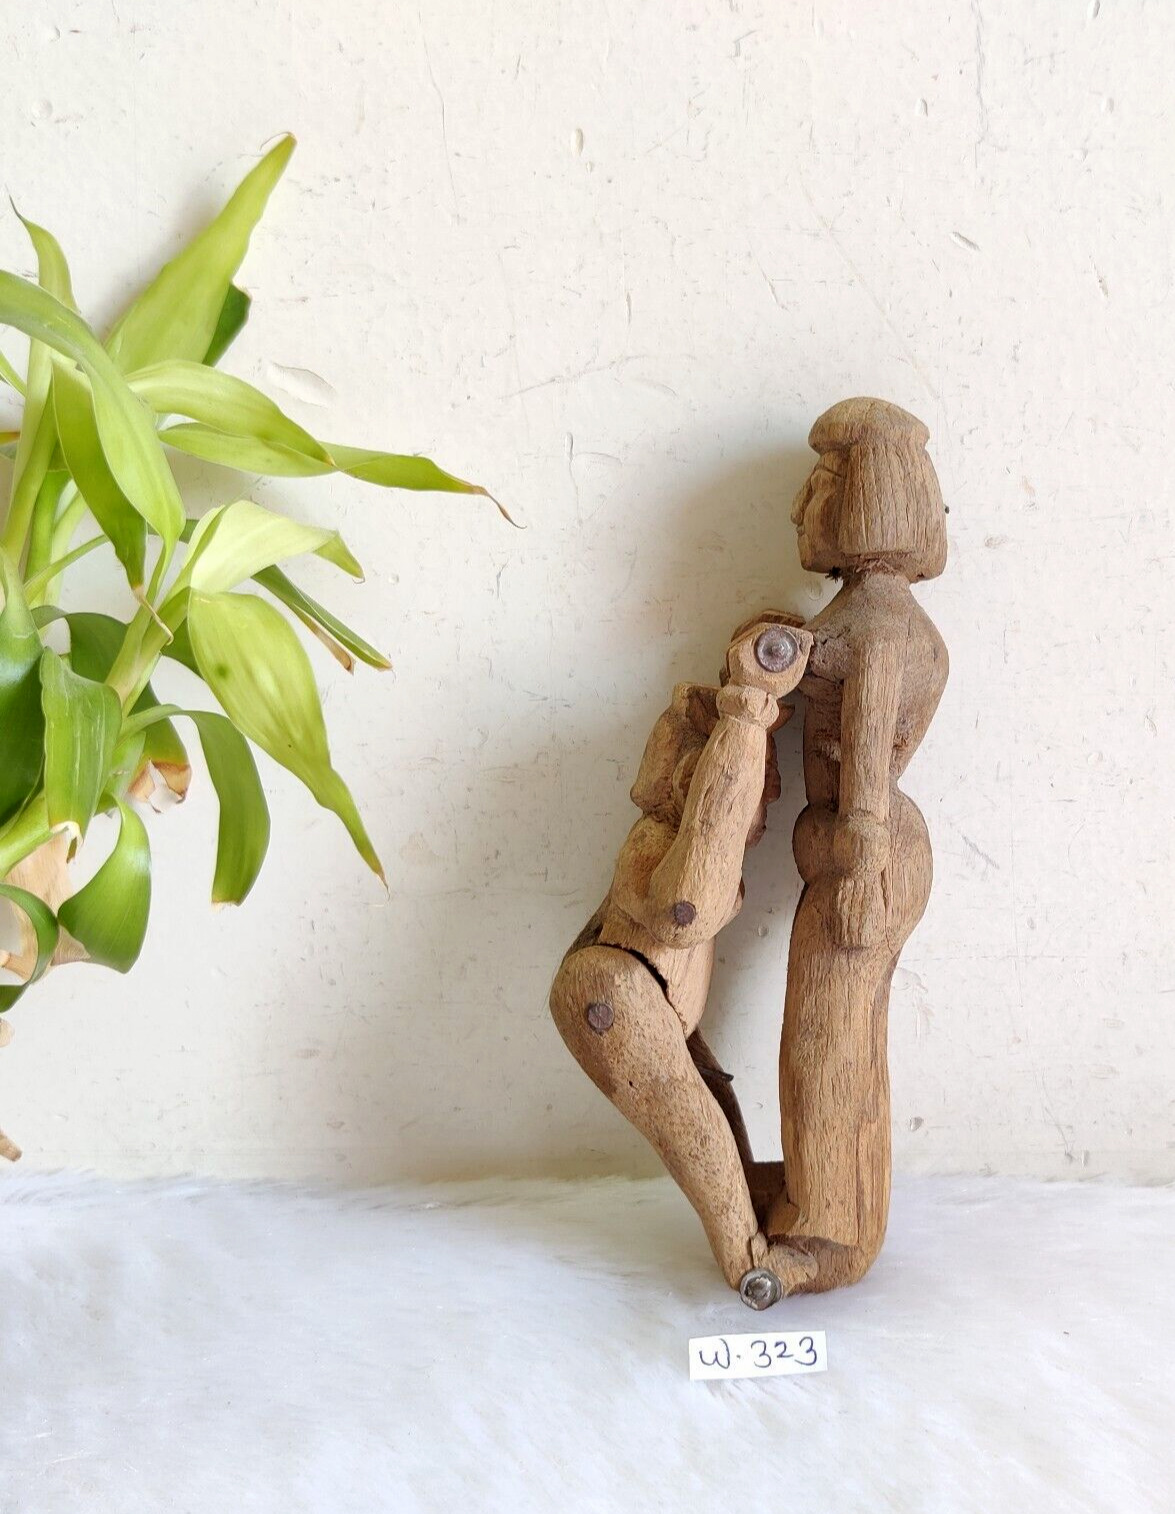 1920s Vintage Handmade Erotic Wooden Sculpture Figure Toy Rare Collectibles W323